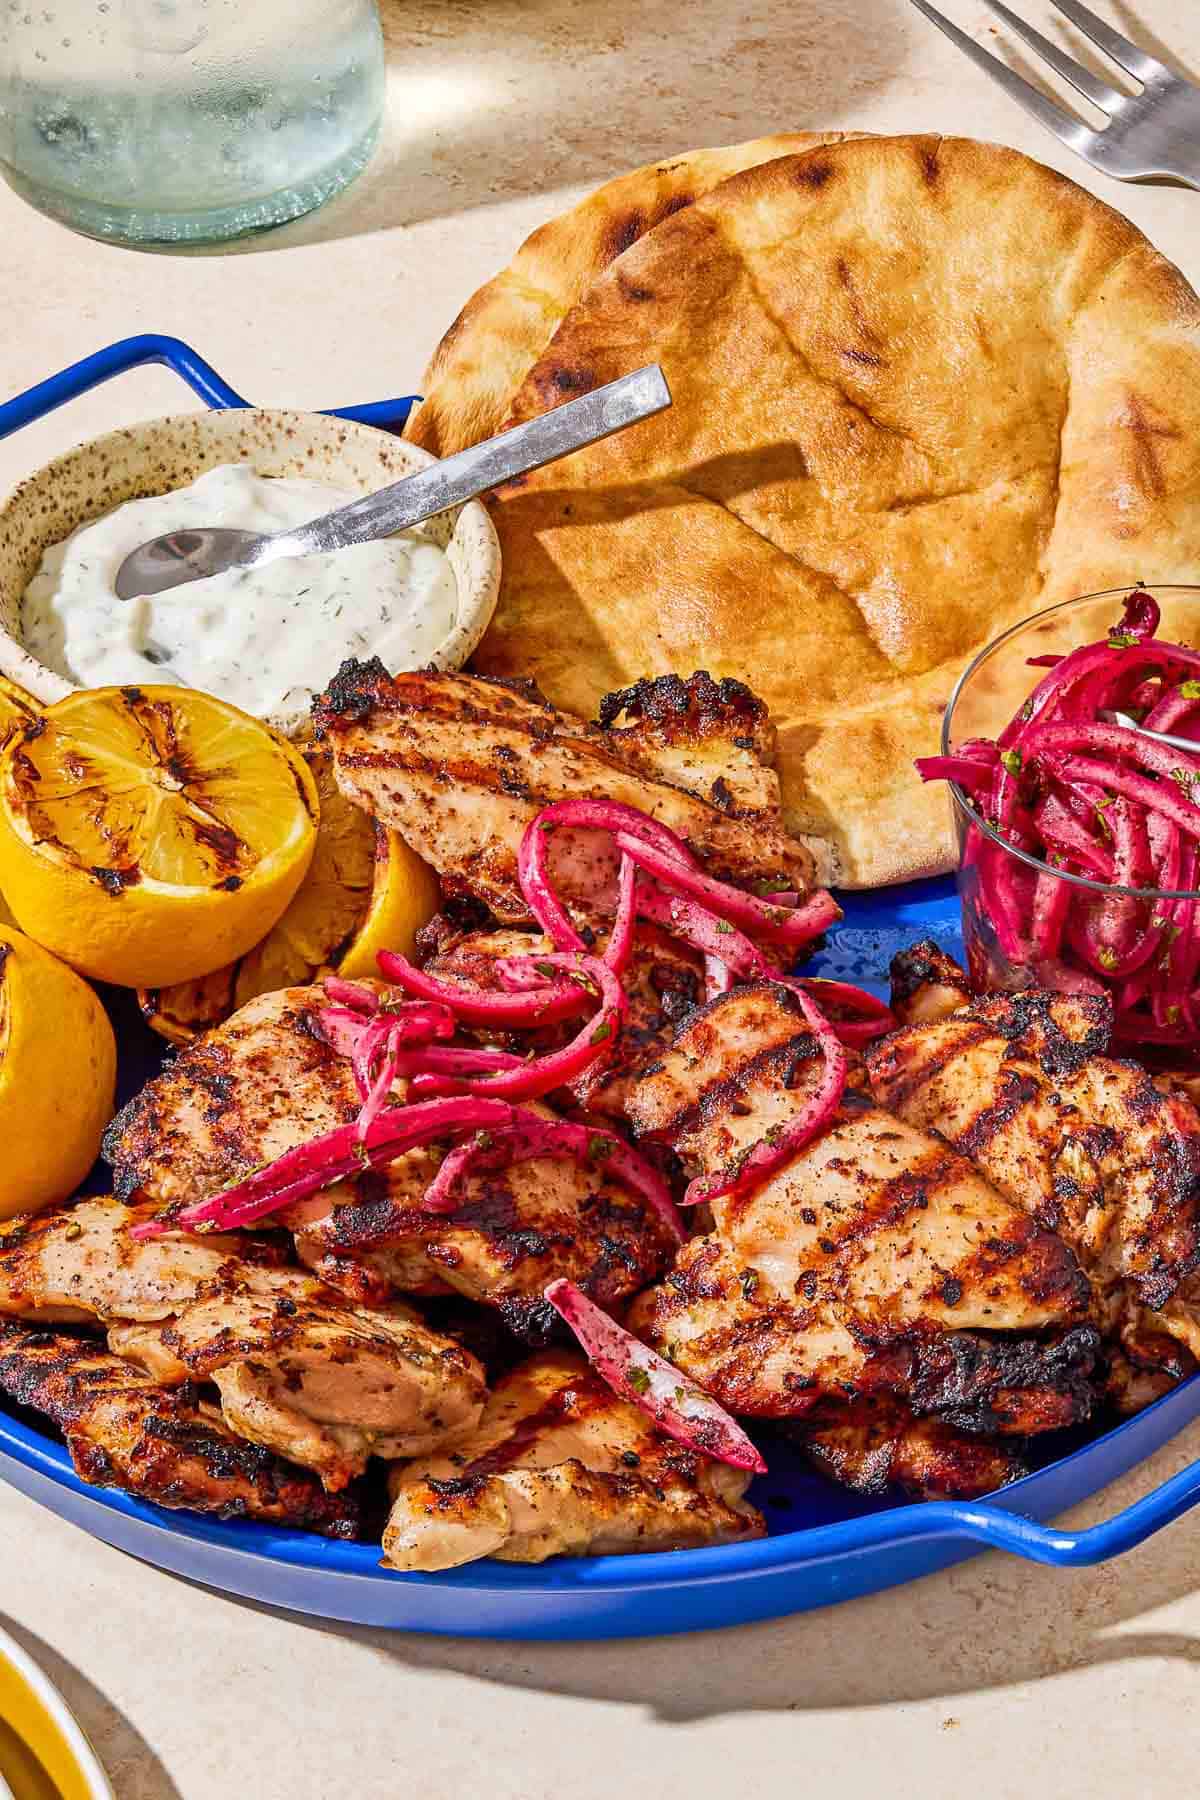 Grilled sumac chicken thighs on a serving platter with pickled red onions, grilled lemon halves, tzatziki sauce, and pita bread.